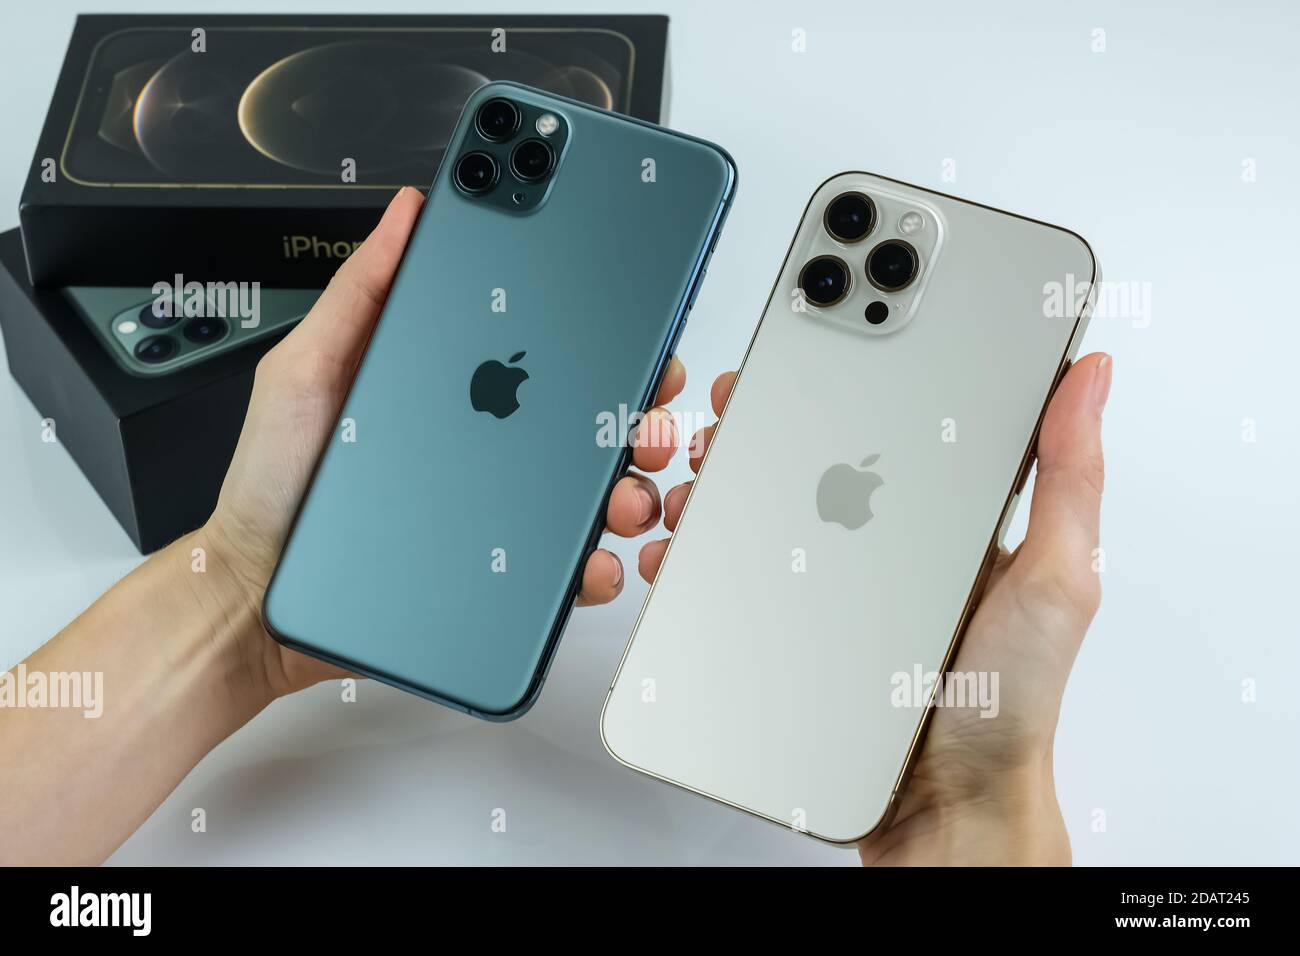 Phone 12 Pro Max in Gold next to iPhone 11 Pro Max in Midnight